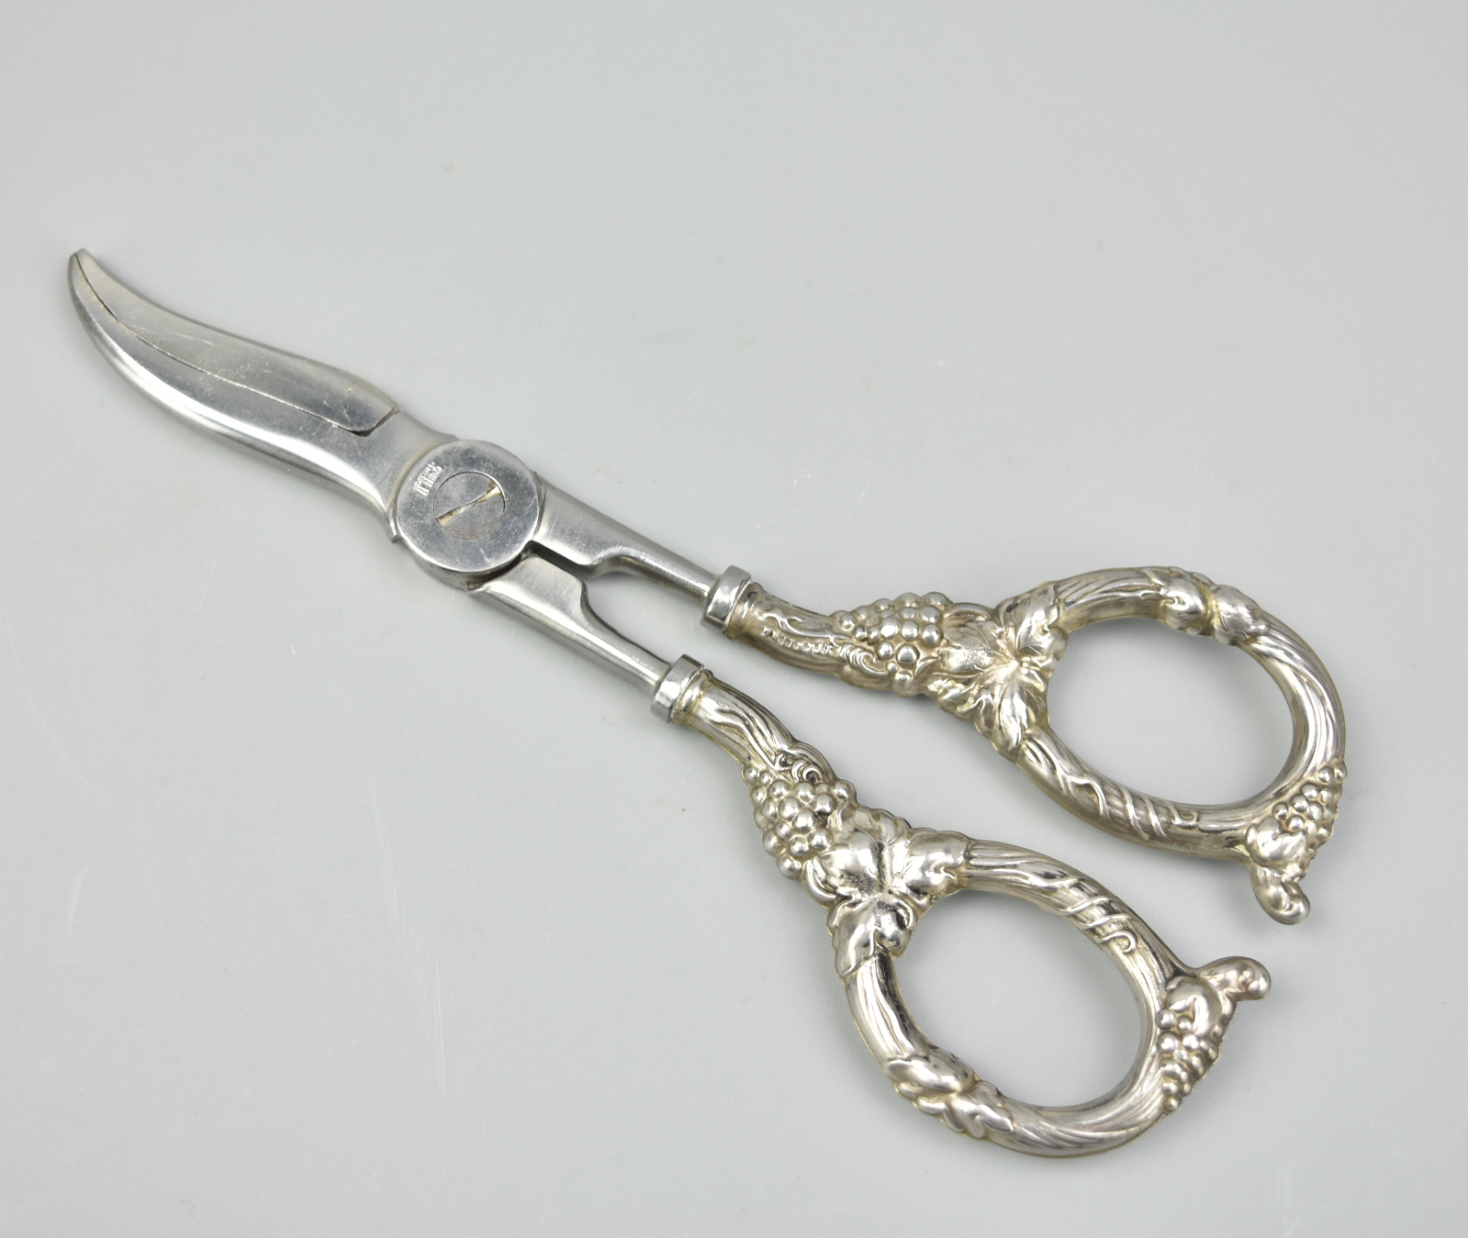 SILVER DINING SCISSORS A set of 2cf7a6